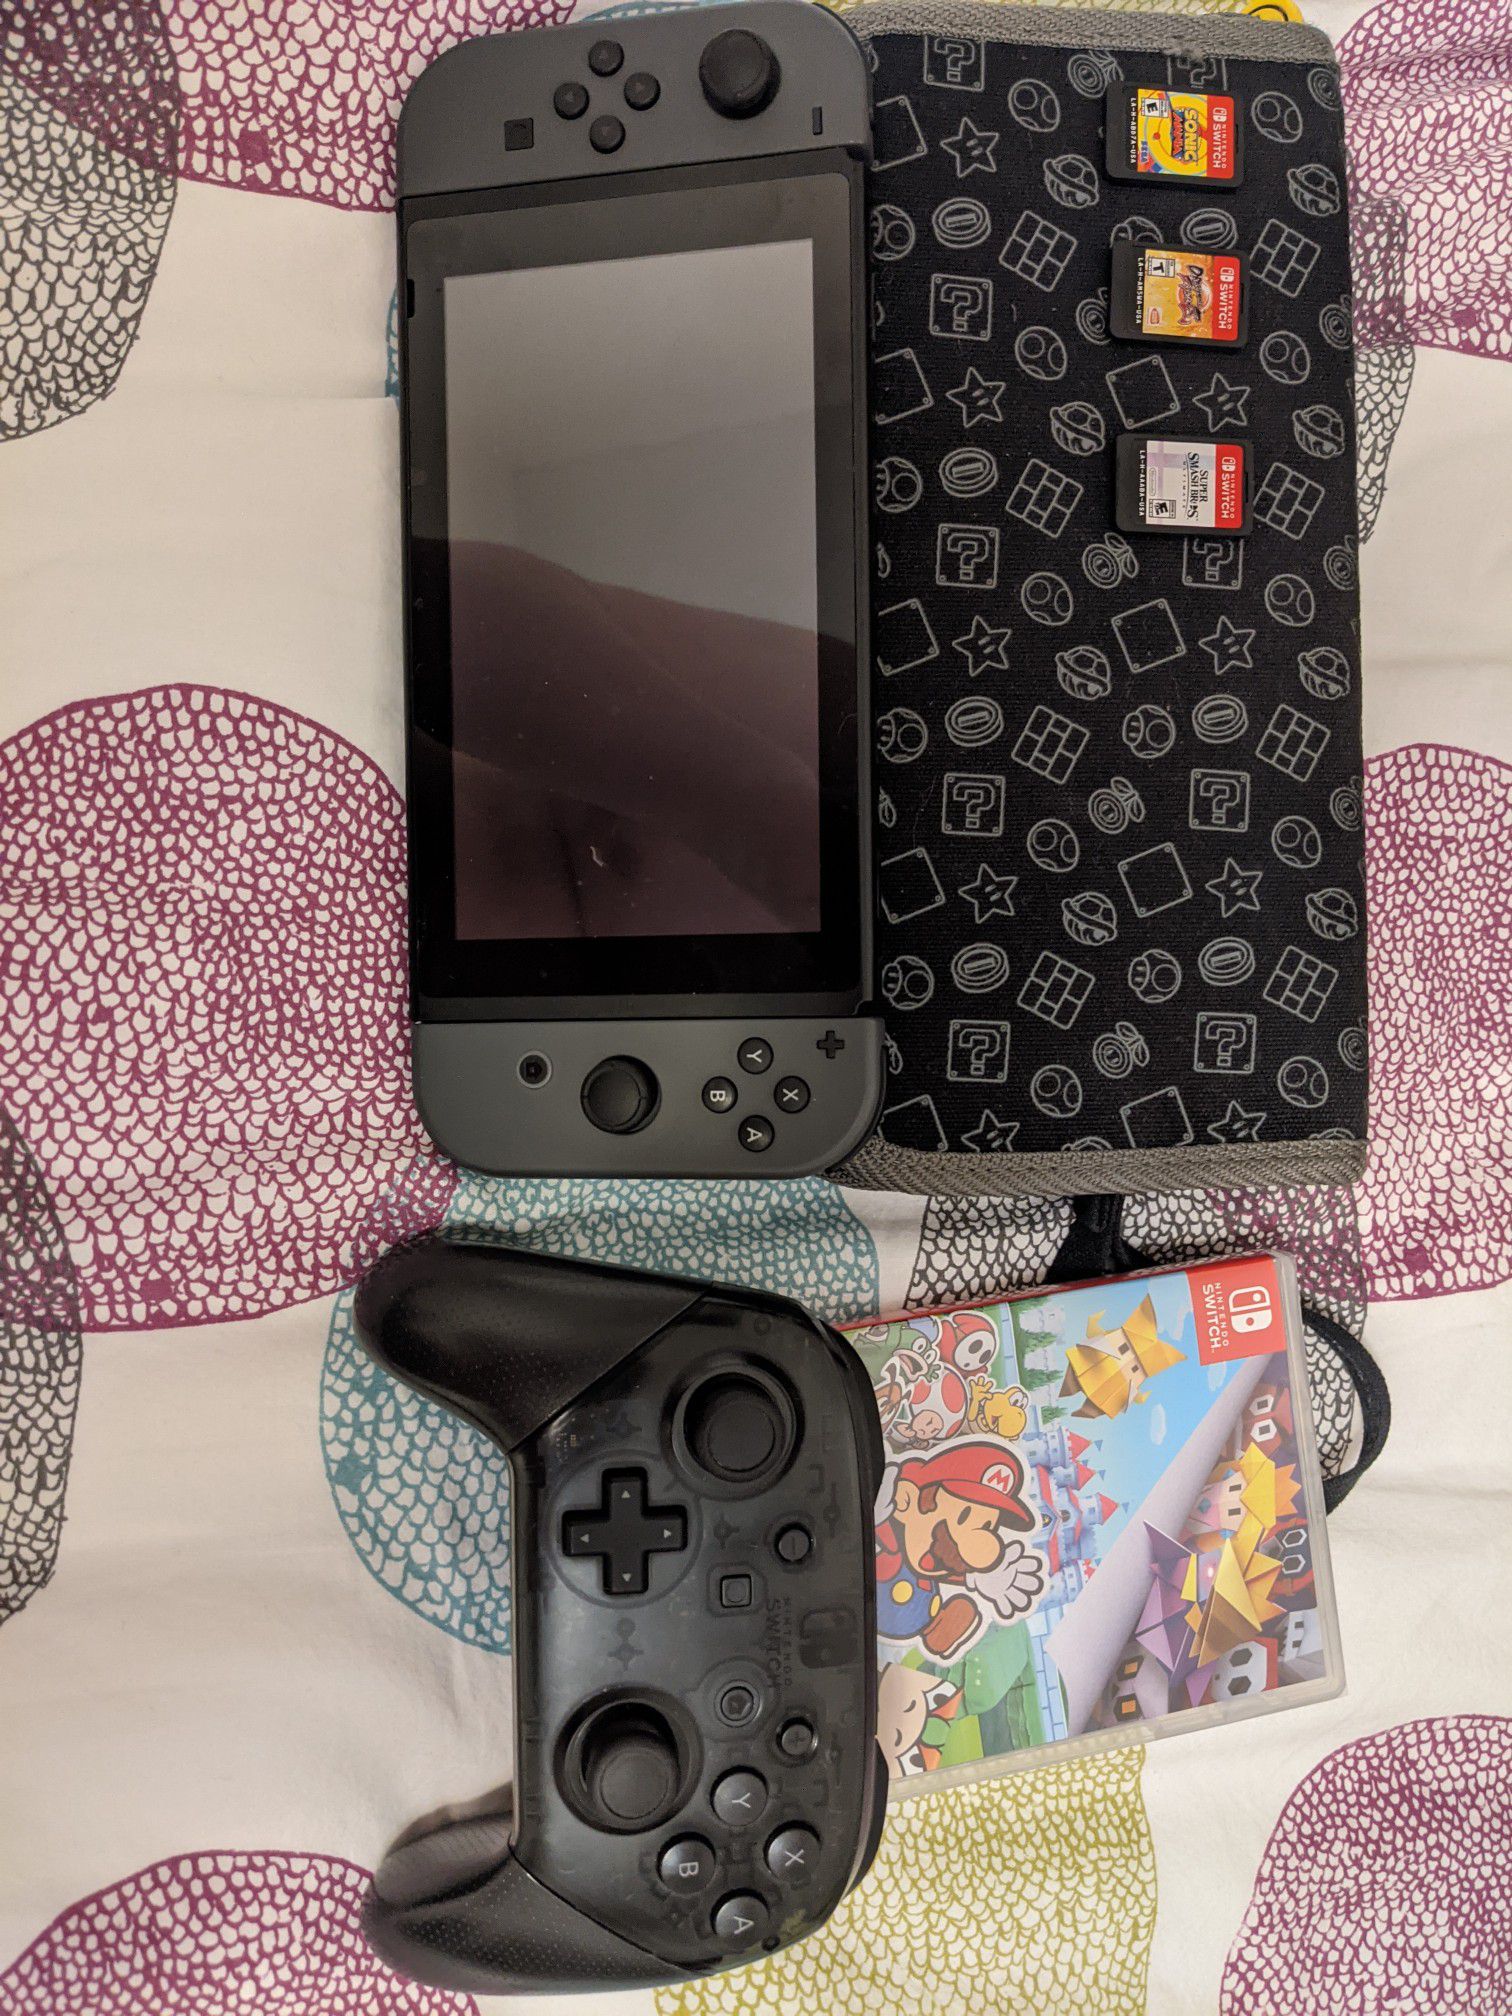 Nintendo Switch, Accessories, and Games